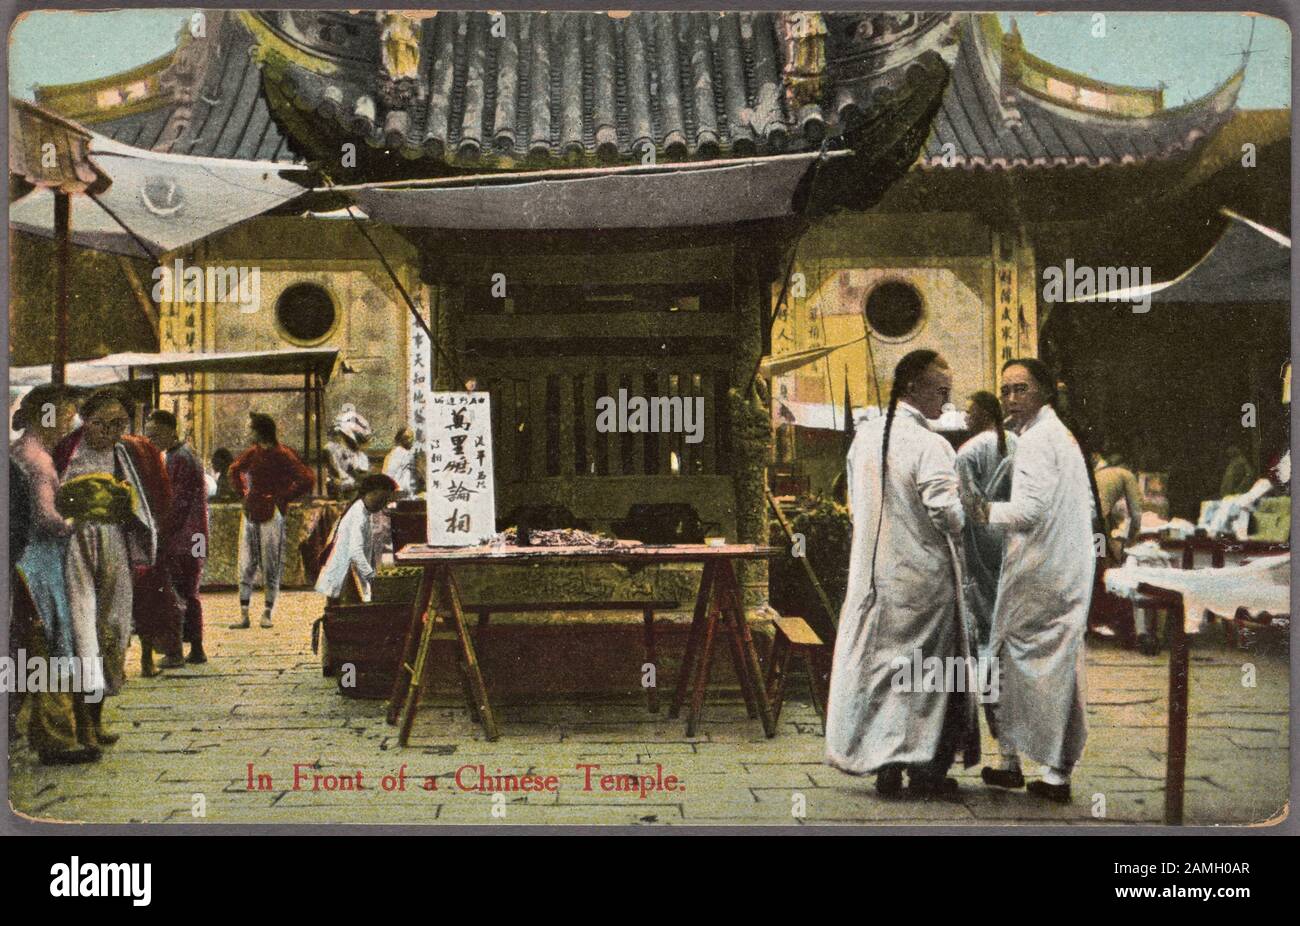 Illustrated postcard of a group of men wearing traditional robes and queue hairstyles in front of a Chinese temple, published by Chrom, 1915. From the New York Public Library. () Stock Photo